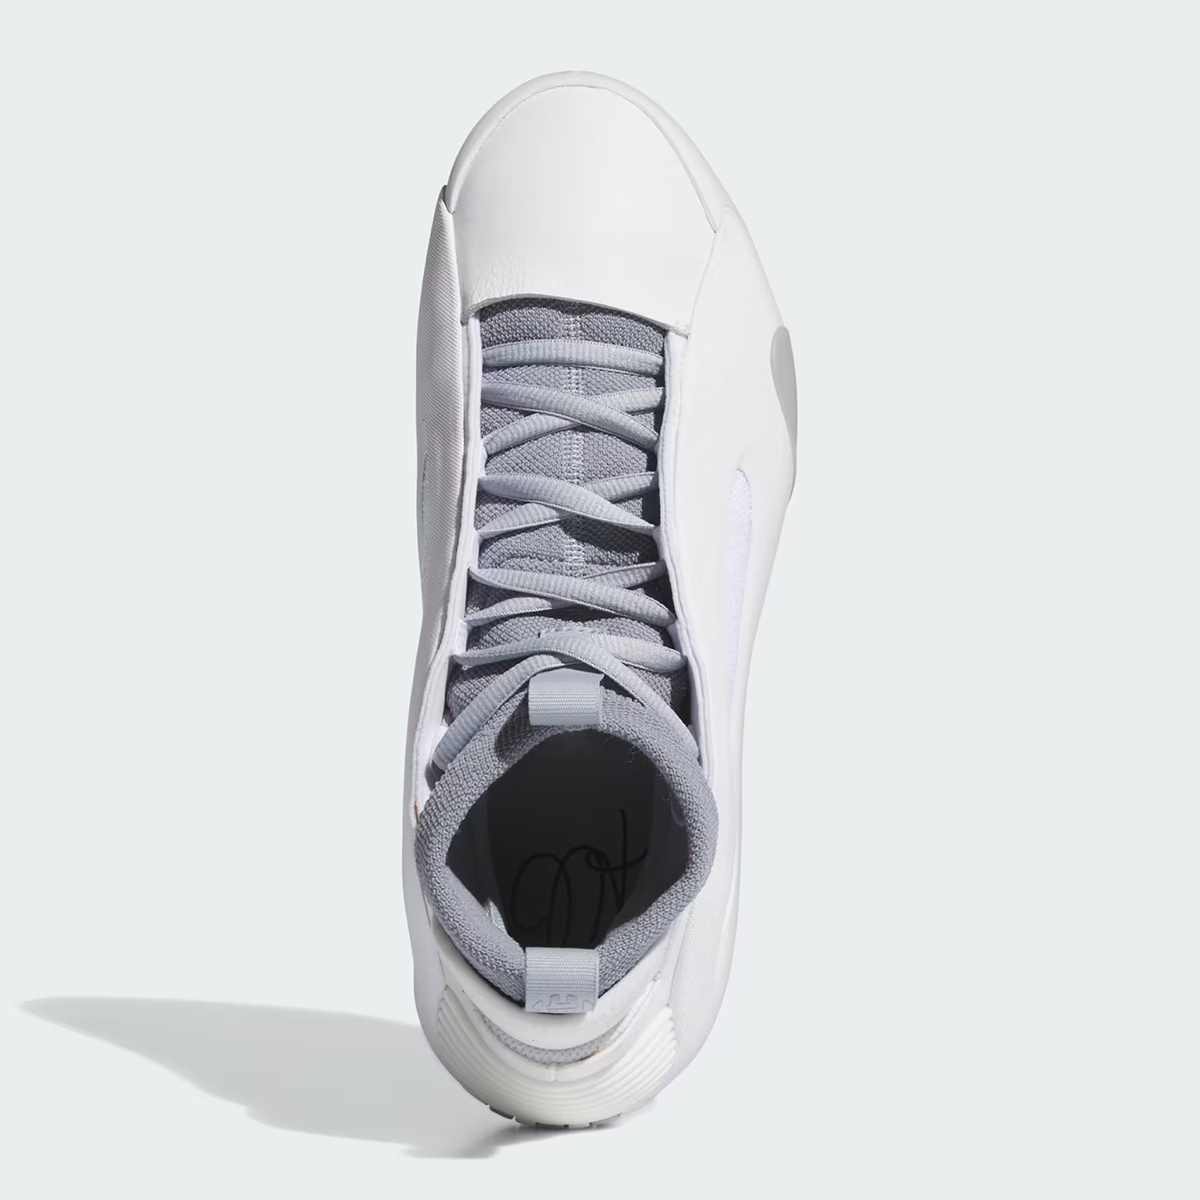 Adidas Harden Vol 8 White Party Ie2696 Release Date 2